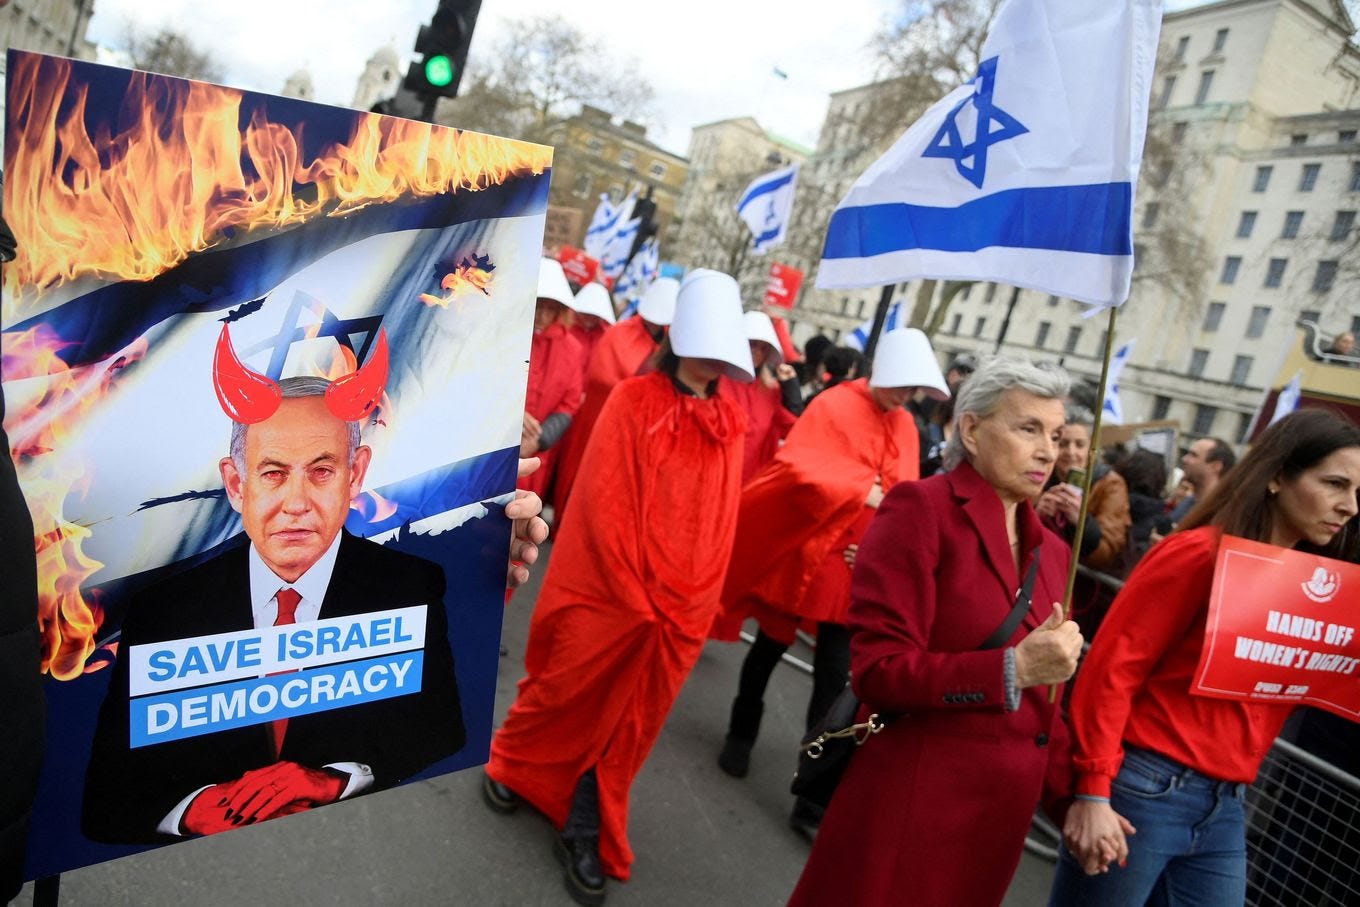 Women's rights activists protest Israeli Prime Minister Benjamin Netanyahu as he visits London on Friday. (Toby Melville/Reuters)